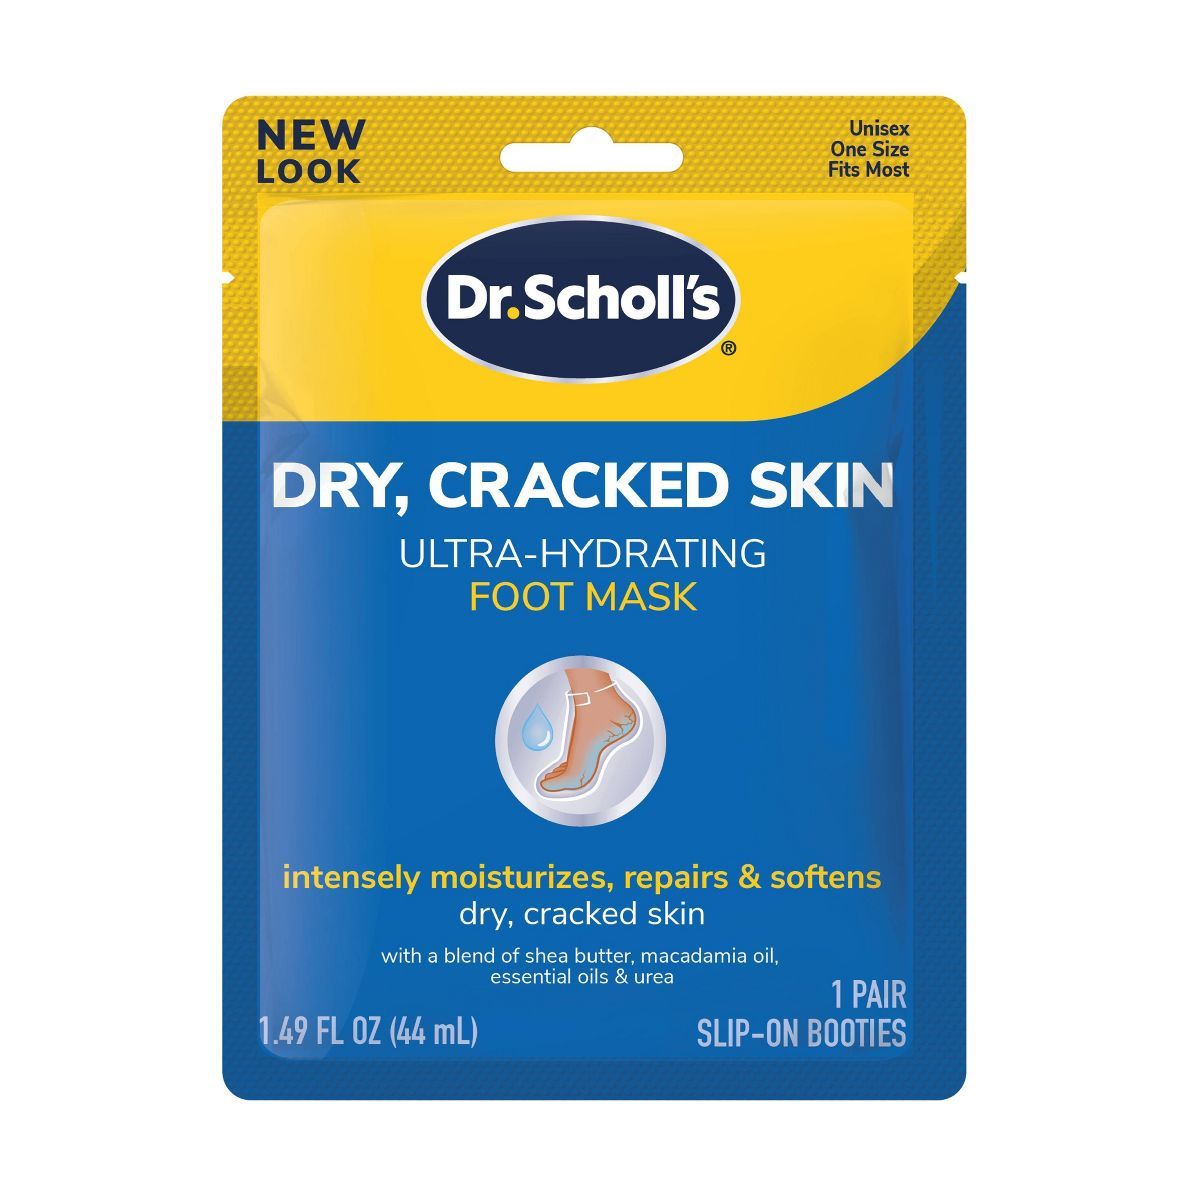 Dr. Scholl's Dry, Cracked Skin Ultra-Hydrating Foot Mask - 1 Pair | Target